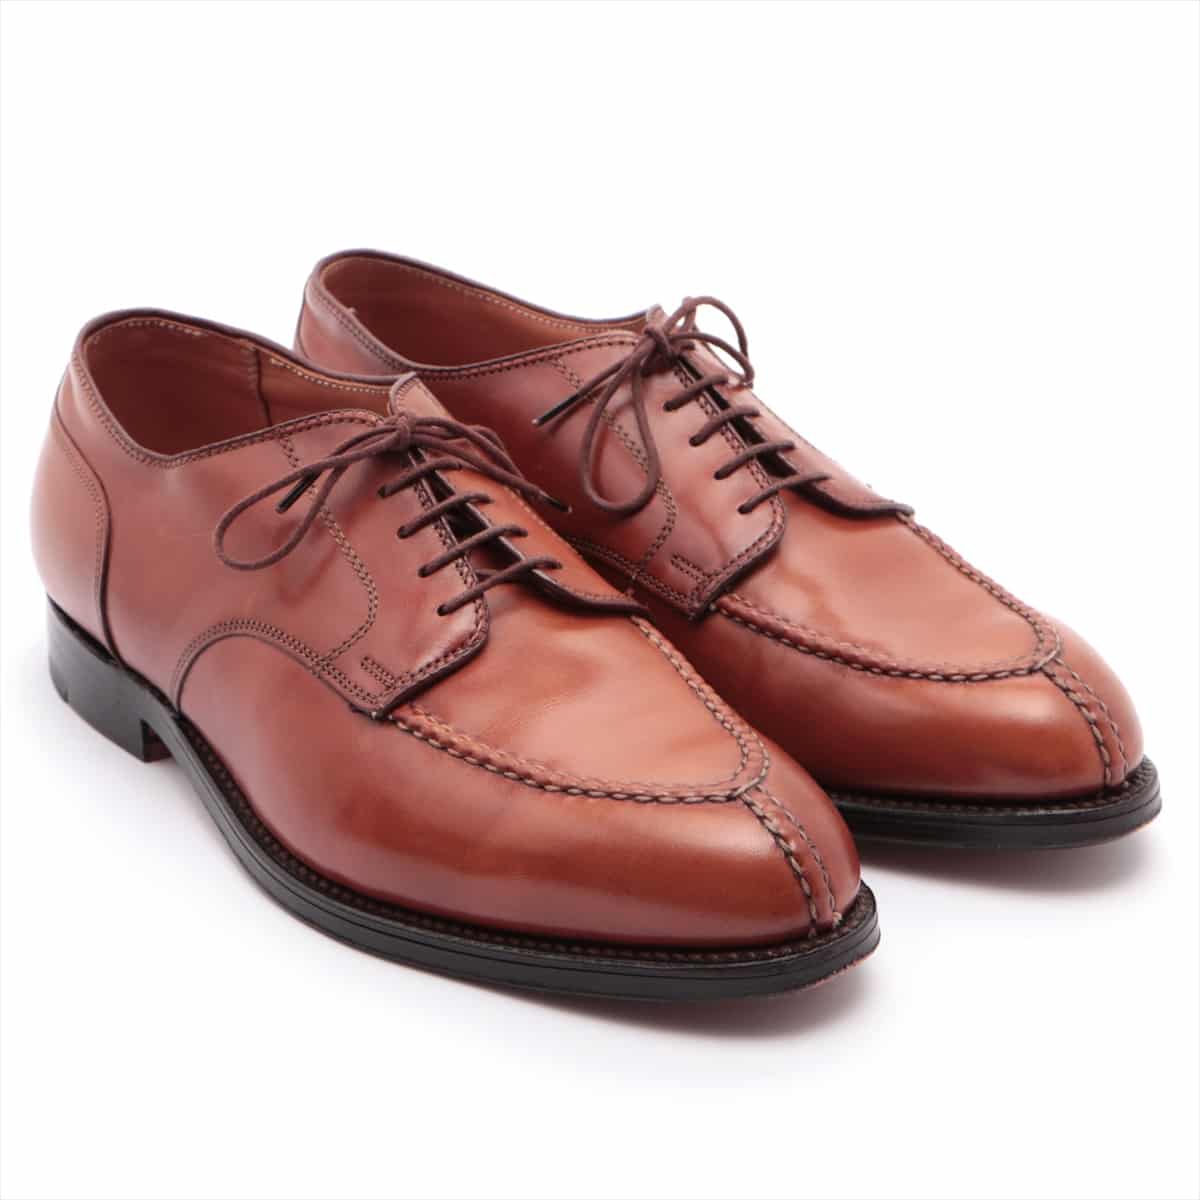 Alden Leather Leather shoes 9 Men's Brown 962